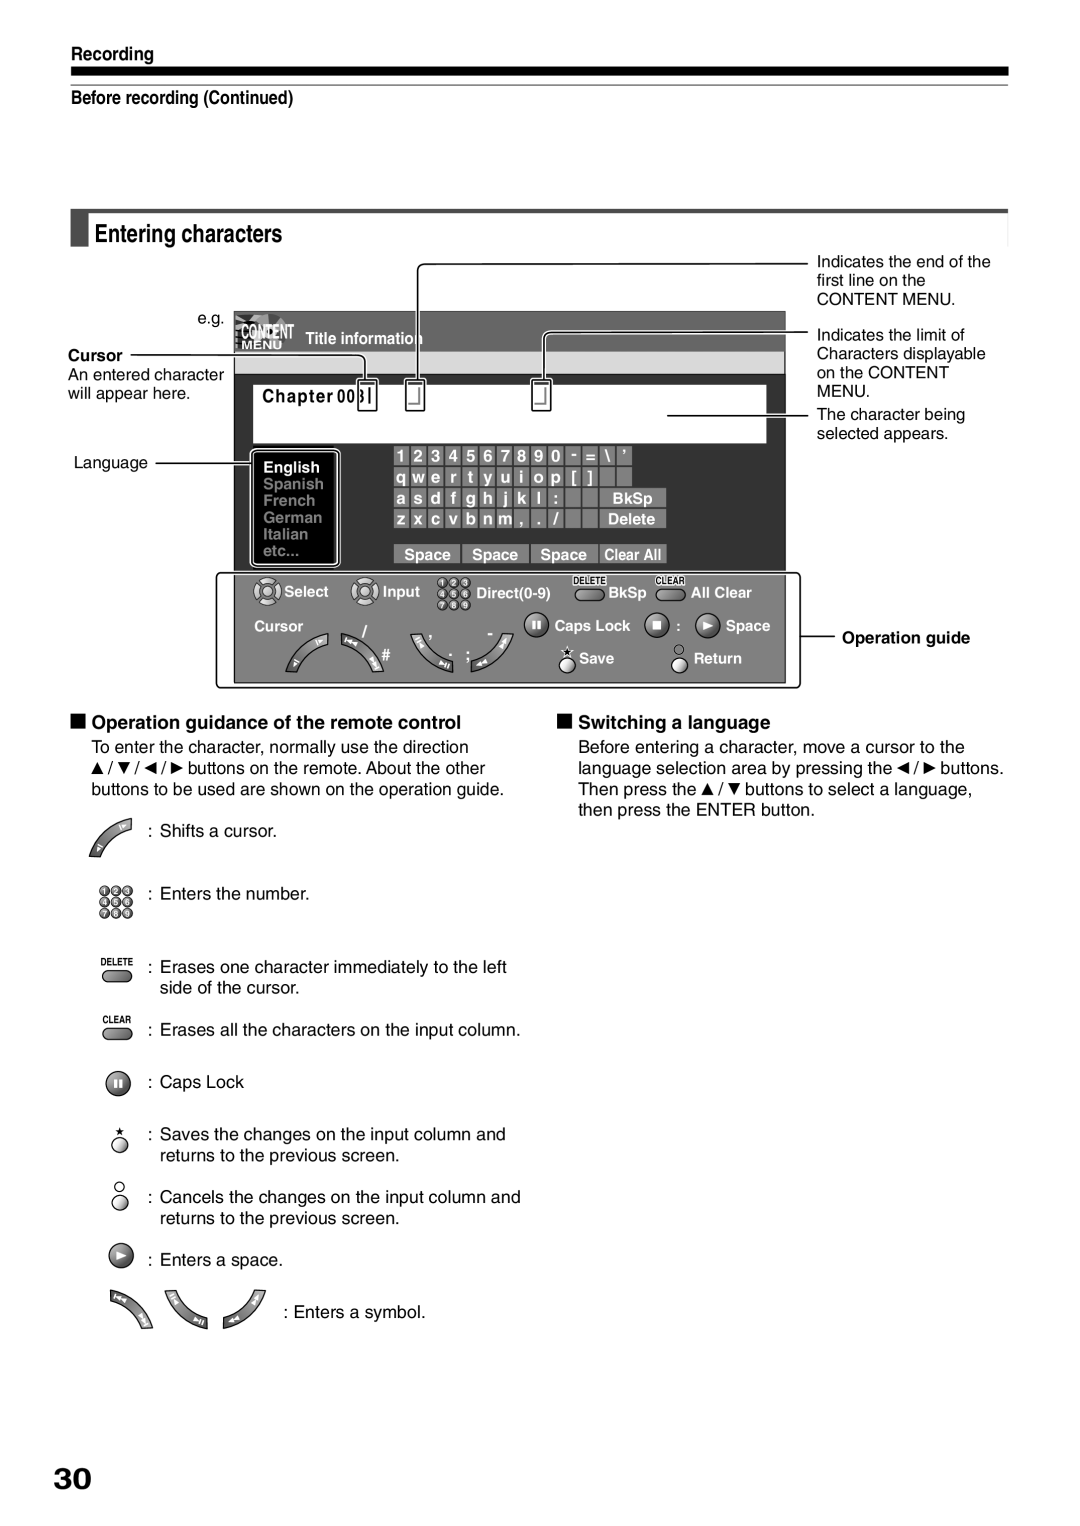 Toshiba RD-XS32SC, RD-XS32SU Entering characters, Operation guidance of the remote control, Switching a language 